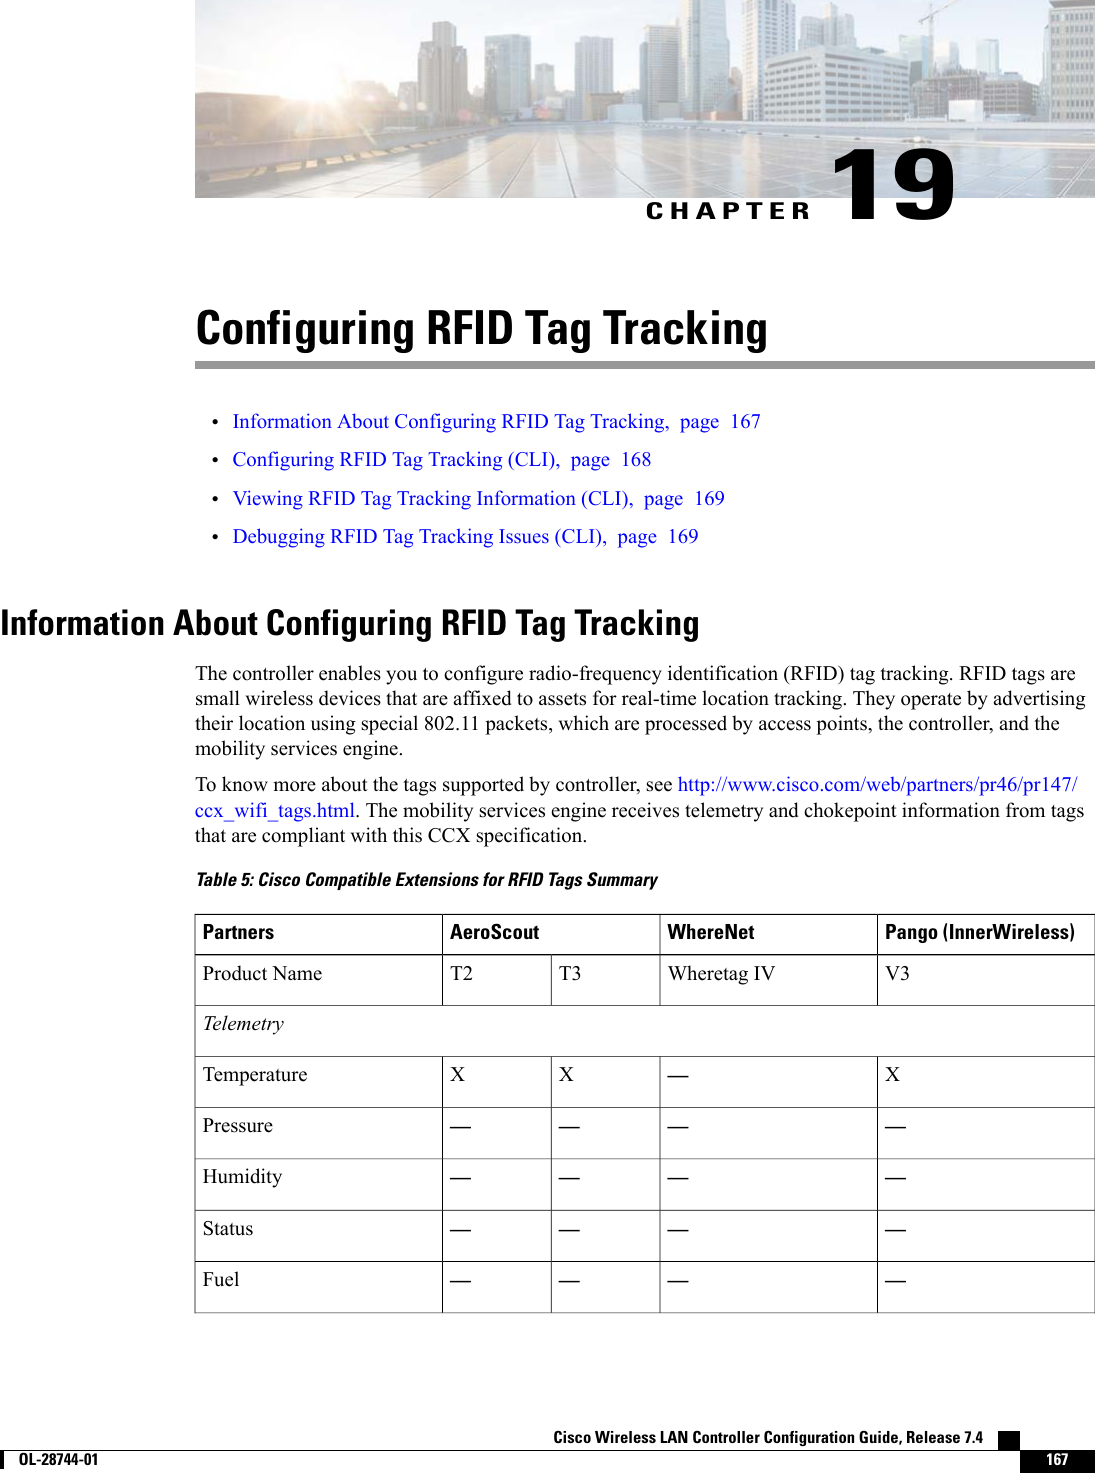 CHAPTER 19Configuring RFID Tag Tracking•Information About Configuring RFID Tag Tracking, page 167•Configuring RFID Tag Tracking (CLI), page 168•Viewing RFID Tag Tracking Information (CLI), page 169•Debugging RFID Tag Tracking Issues (CLI), page 169Information About Configuring RFID Tag TrackingThe controller enables you to configure radio-frequency identification (RFID) tag tracking. RFID tags aresmall wireless devices that are affixed to assets for real-time location tracking. They operate by advertisingtheir location using special 802.11 packets, which are processed by access points, the controller, and themobility services engine.To know more about the tags supported by controller, see http://www.cisco.com/web/partners/pr46/pr147/ccx_wifi_tags.html. The mobility services engine receives telemetry and chokepoint information from tagsthat are compliant with this CCX specification.Table 5: Cisco Compatible Extensions for RFID Tags SummaryPango (InnerWireless)WhereNetAeroScoutPartnersV3Wheretag IVT3T2Product NameTelemetryX—XXTemperature————Pressure————Humidity————Status————FuelCisco Wireless LAN Controller Configuration Guide, Release 7.4        OL-28744-01 167